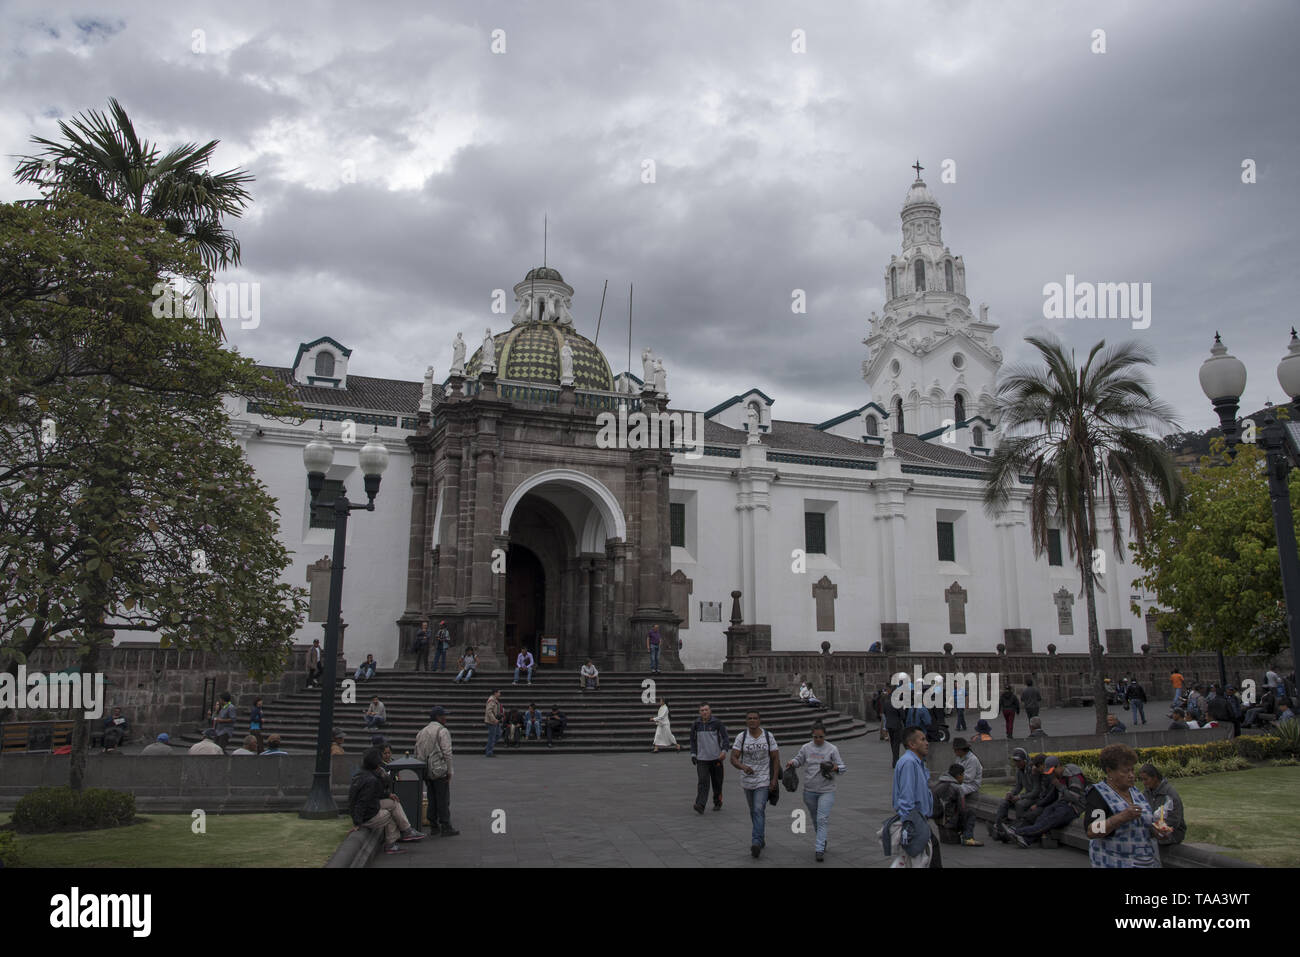 Built from 1562 and finished in 1565 Metropolitan Cathedral of Quito is one of the most impressive colonial style churches in Quito and Ecuador. Stock Photo